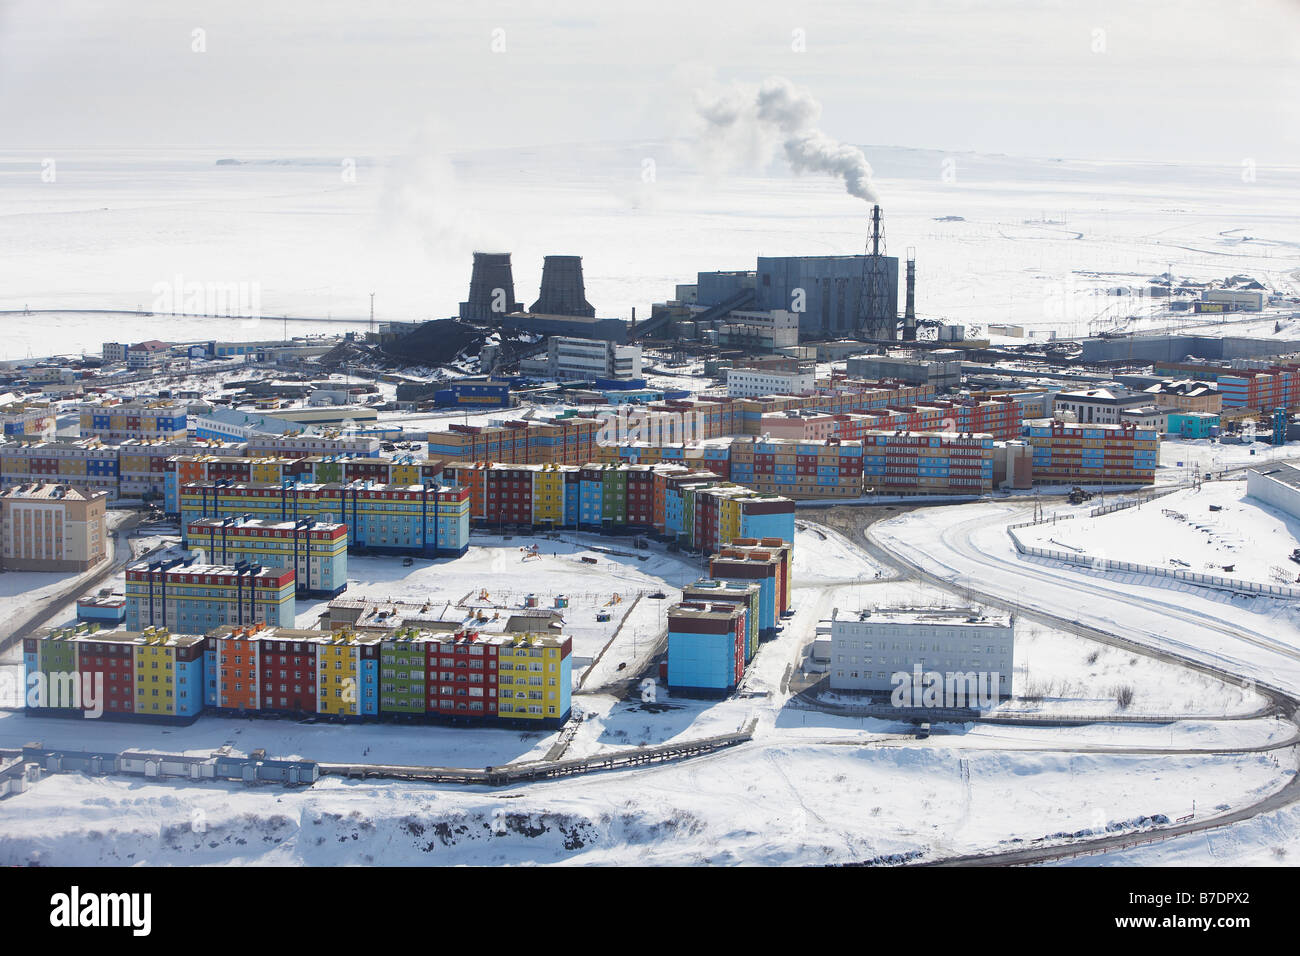 Coal powered polluting station close to apartment buildings, Anadyr Chukotka Siberia, Russia Stock Photo